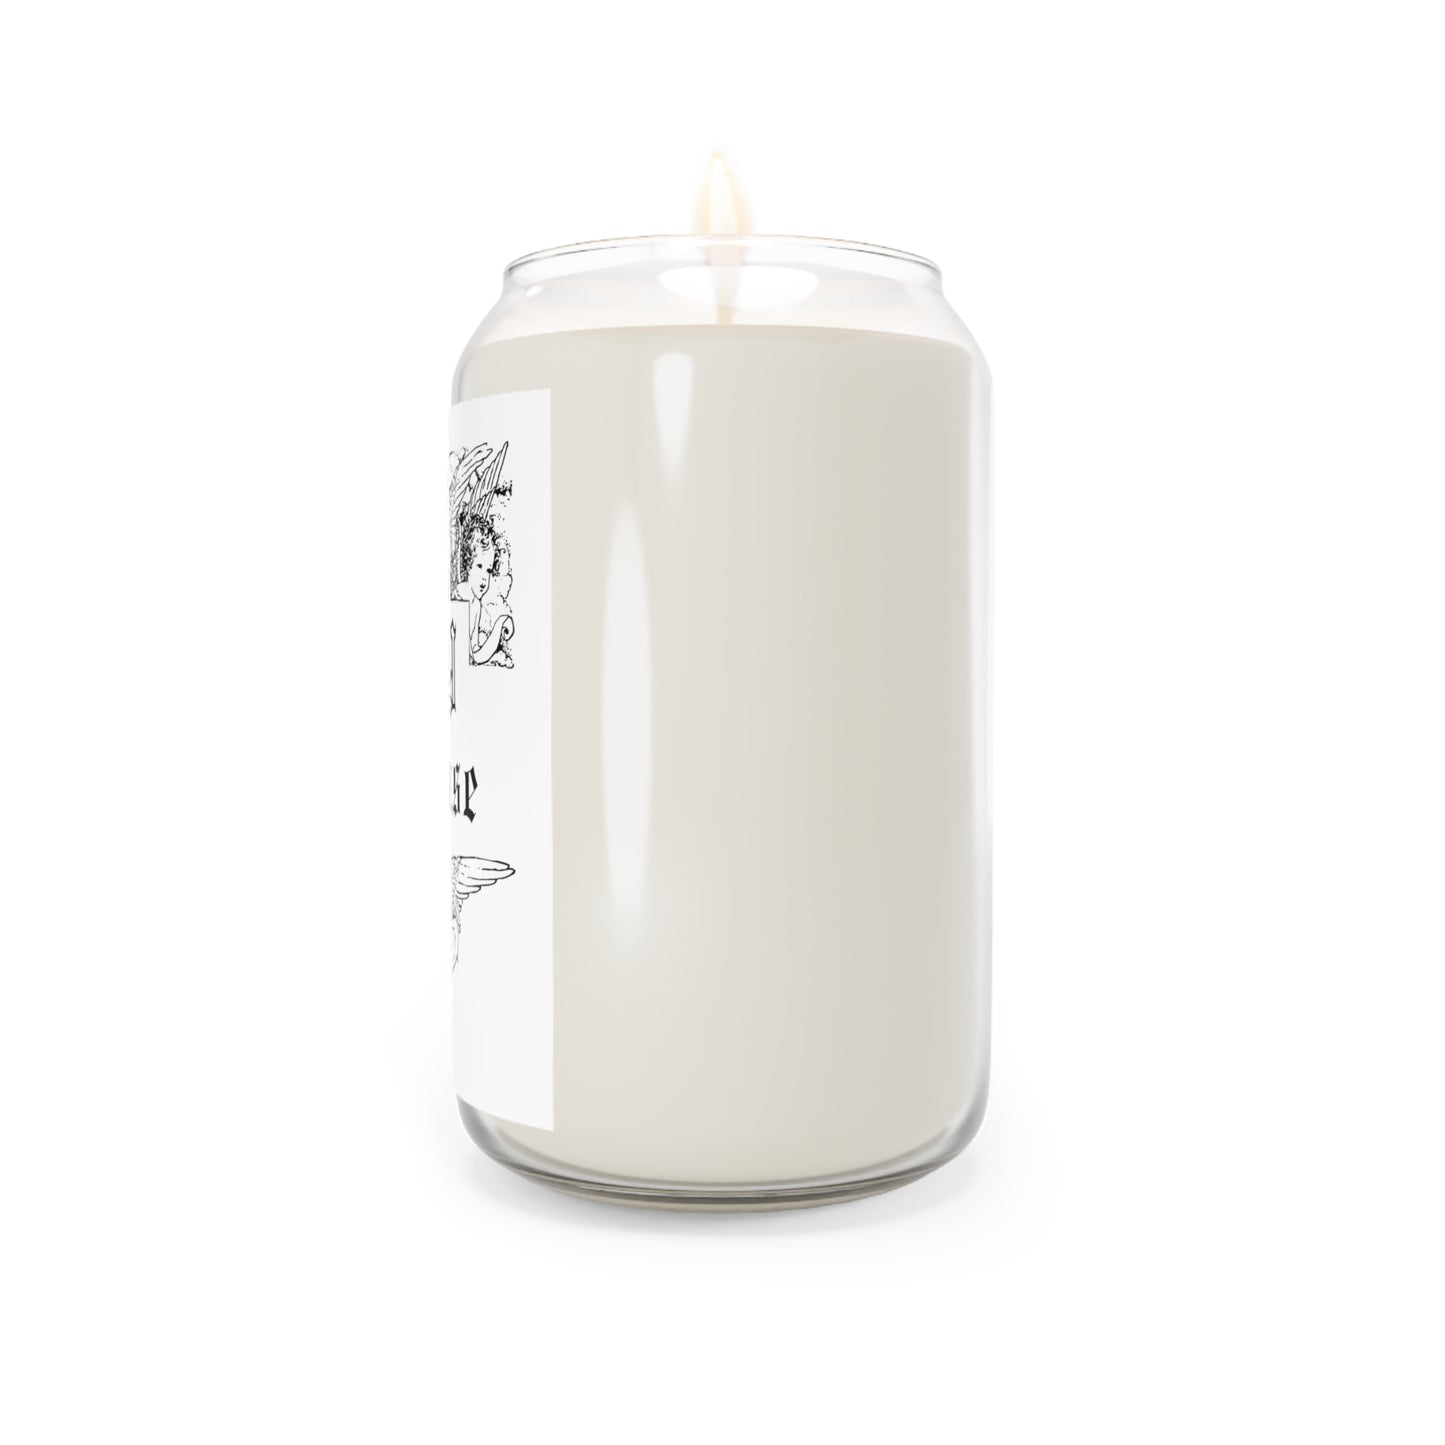 999 Angel Number Scented Candle, 13.75oz